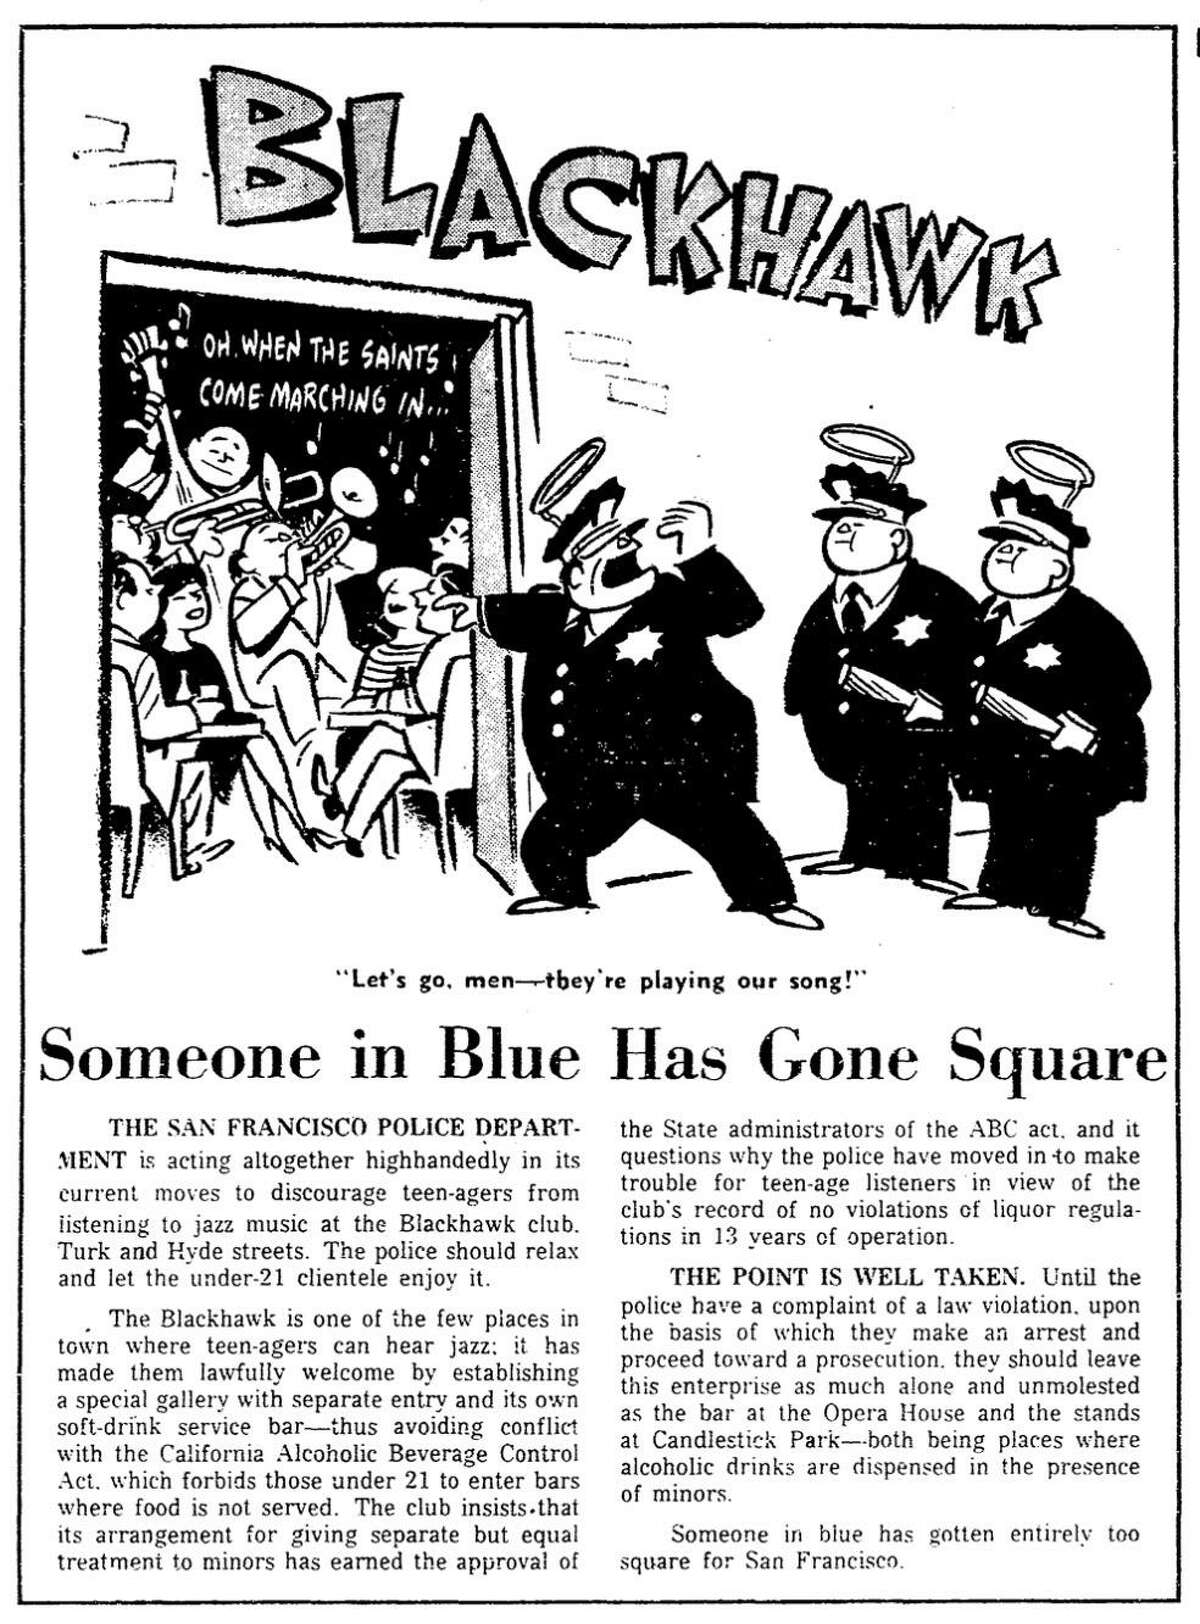 A 1961 Chronicle editorial criticized police attempts to ban teenagers at the Blackhawk jazz club.